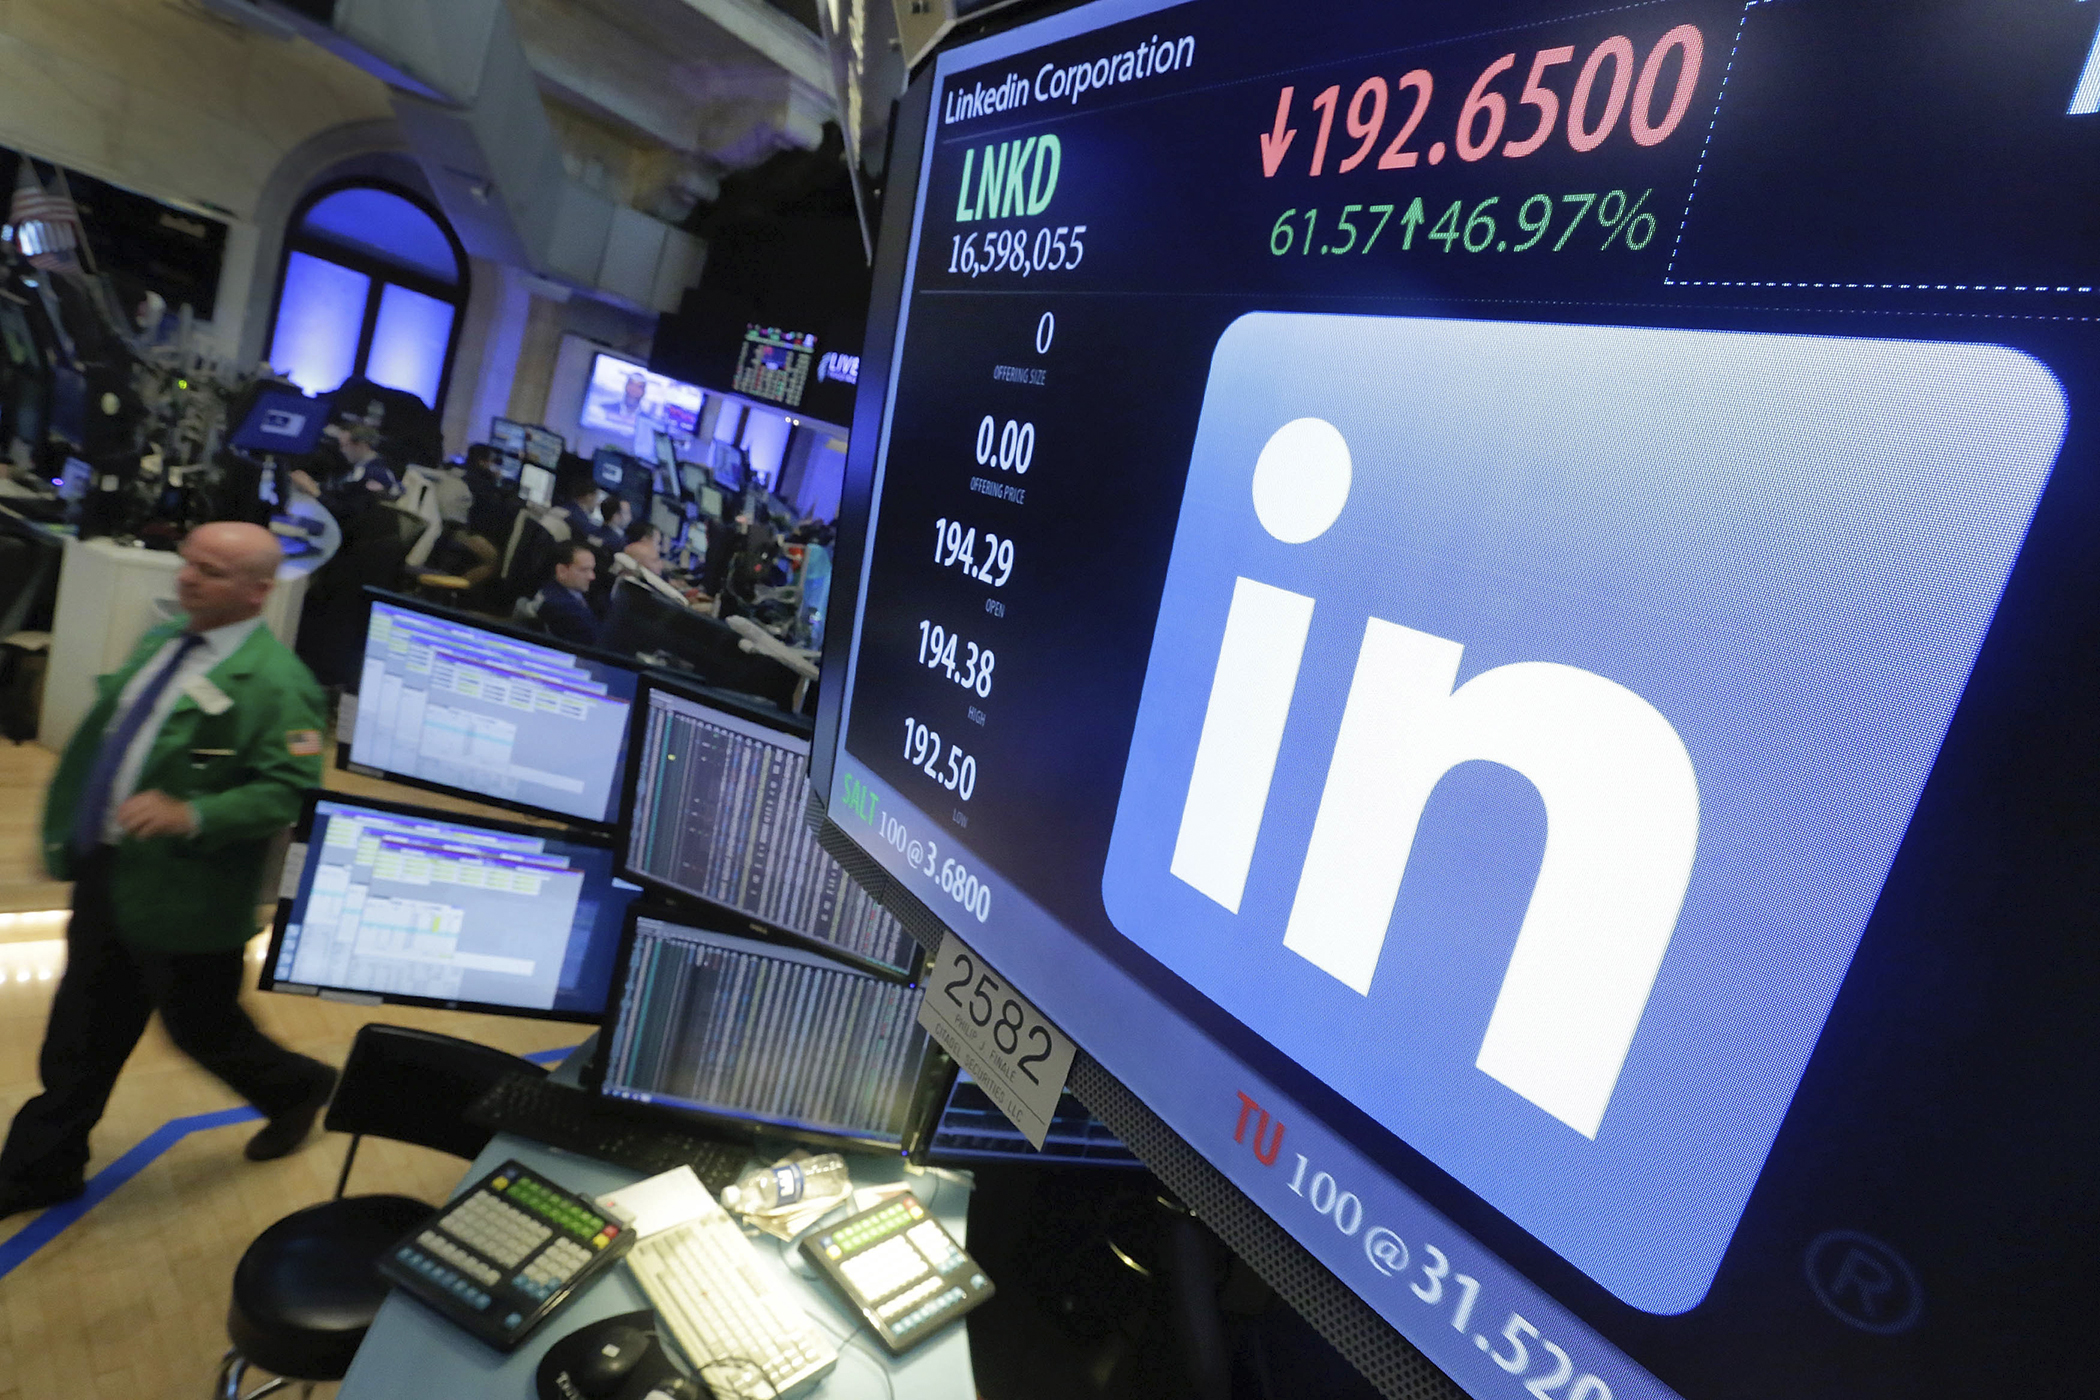 The LinkeIn logo appears on a screen at the post where it trades on the floor of the New York Stock Exchange, June 13, 2016. In a surprise move, Microsoft said Monday that it is buying professional networking service site LinkedIn for about $26.2 billion. (Richard Drew&mdash;AP)